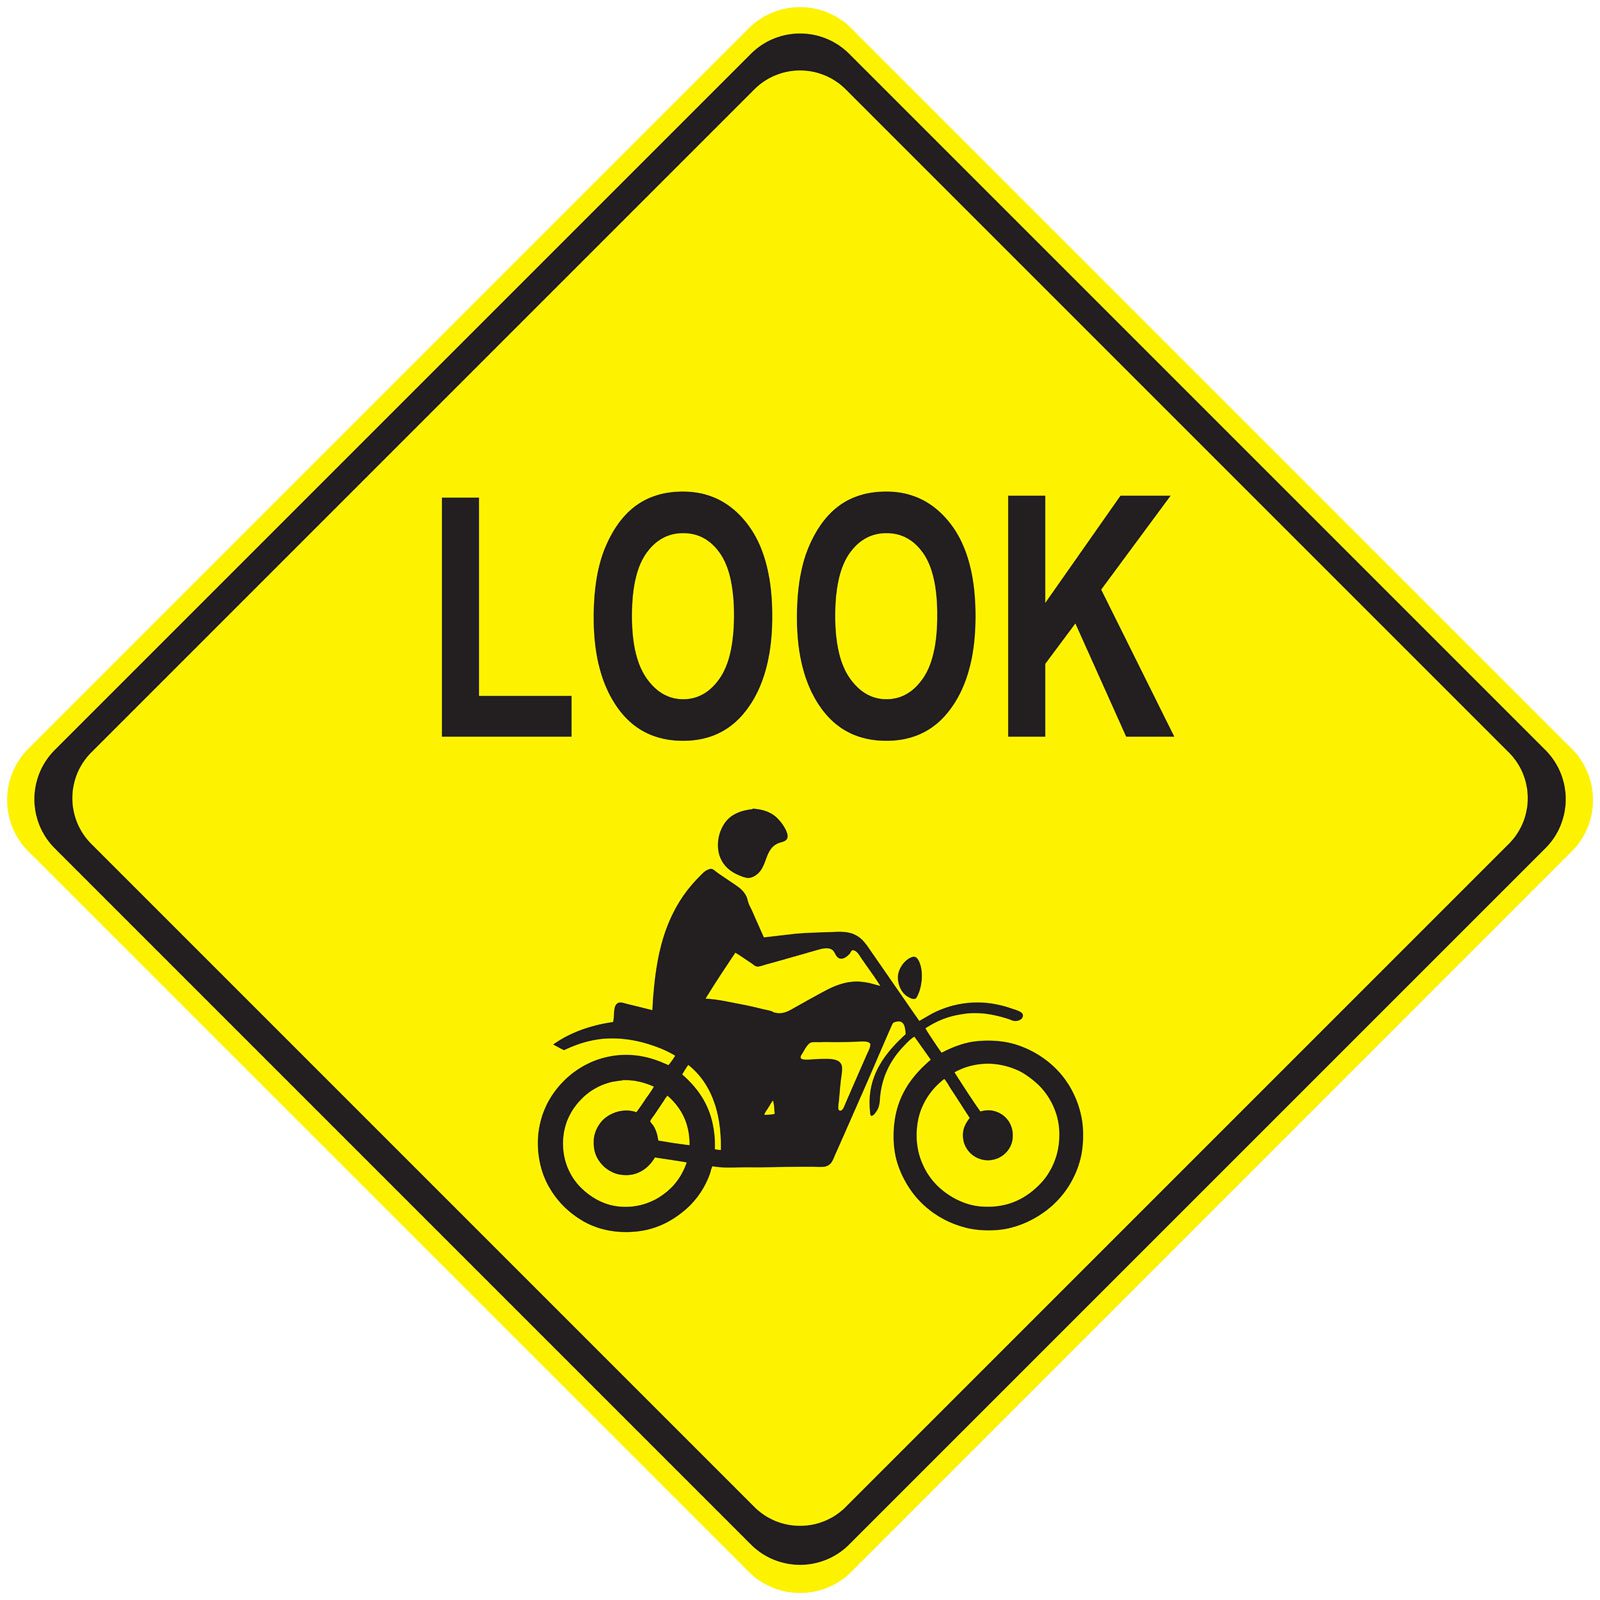 NY motorcycle insurance is critial, but so is general safety!